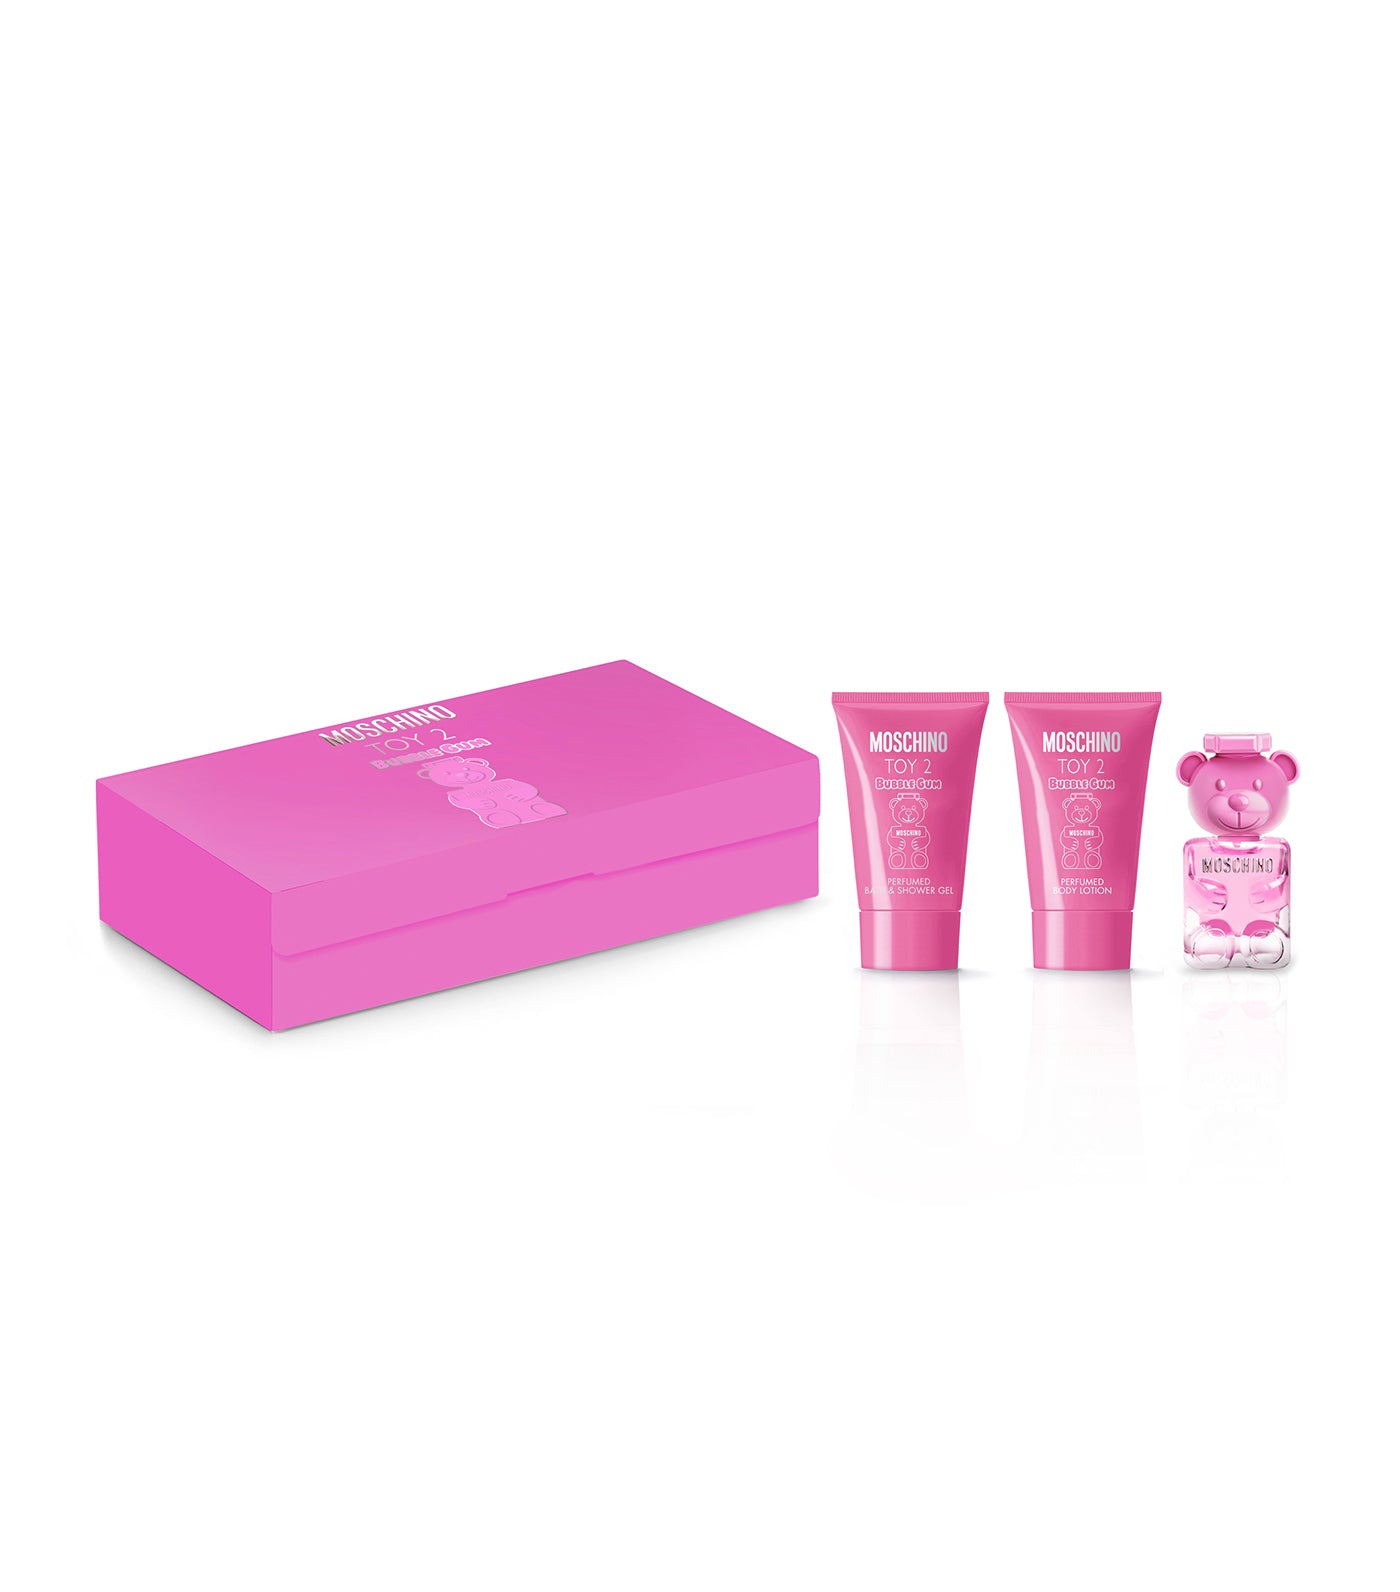 Free Toy 2 Bubble Gum Bath and Body Set